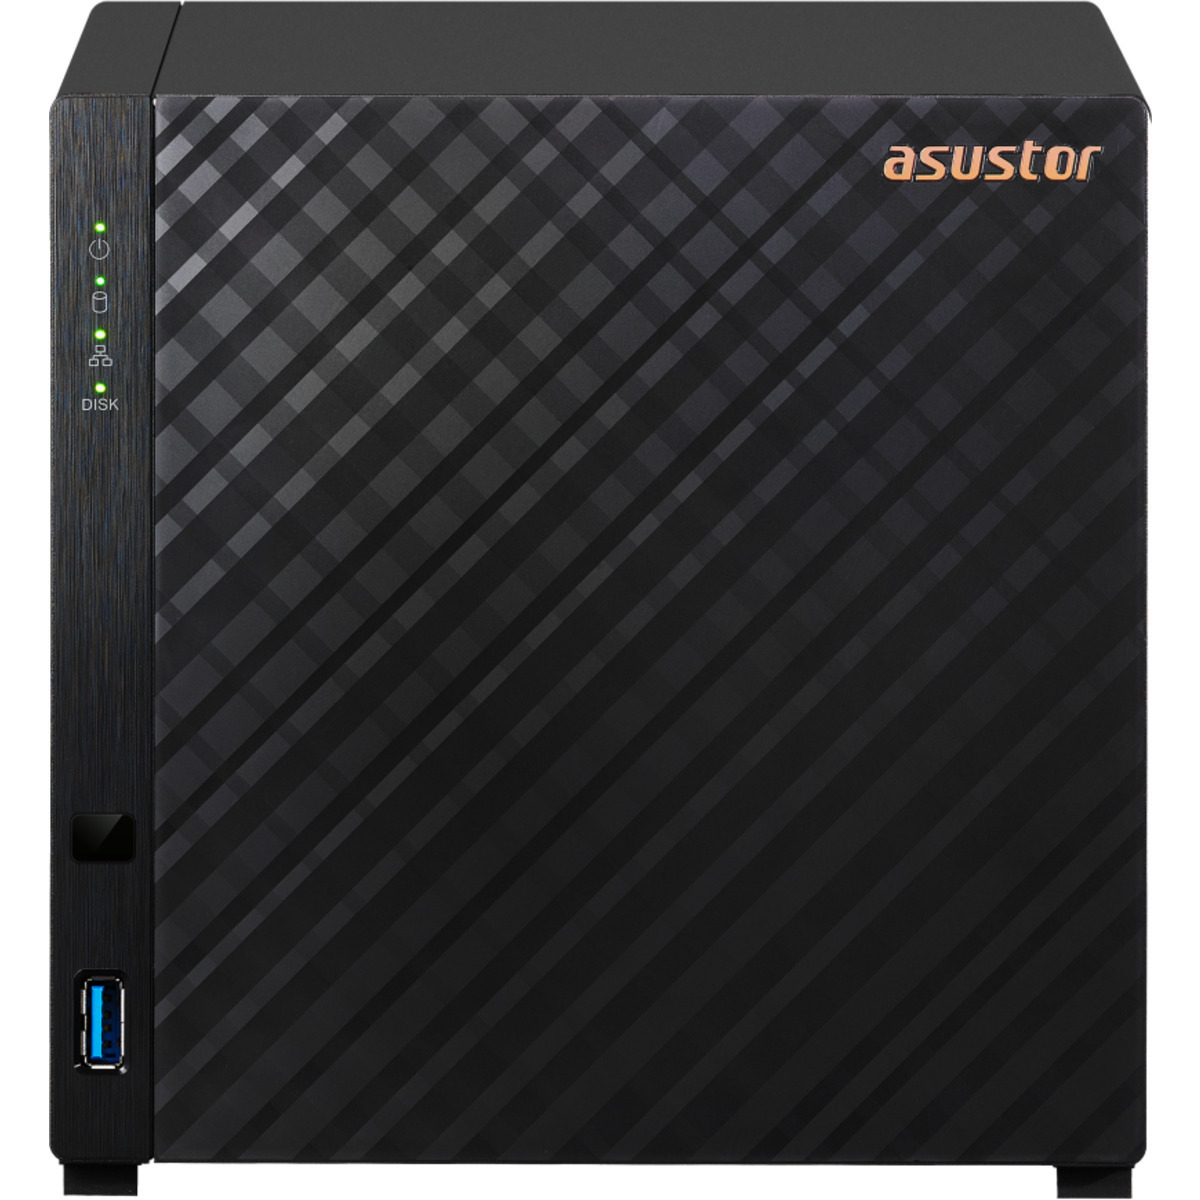 ASUSTOR DRIVESTOR 4 AS1104T 40tb 4-Bay Desktop Personal / Basic Home / Small Office NAS - Network Attached Storage Device 2x20tb Seagate EXOS X20 ST20000NM007D 3.5 7200rpm SATA 6Gb/s HDD ENTERPRISE Class Drives Installed - Burn-In Tested DRIVESTOR 4 AS1104T